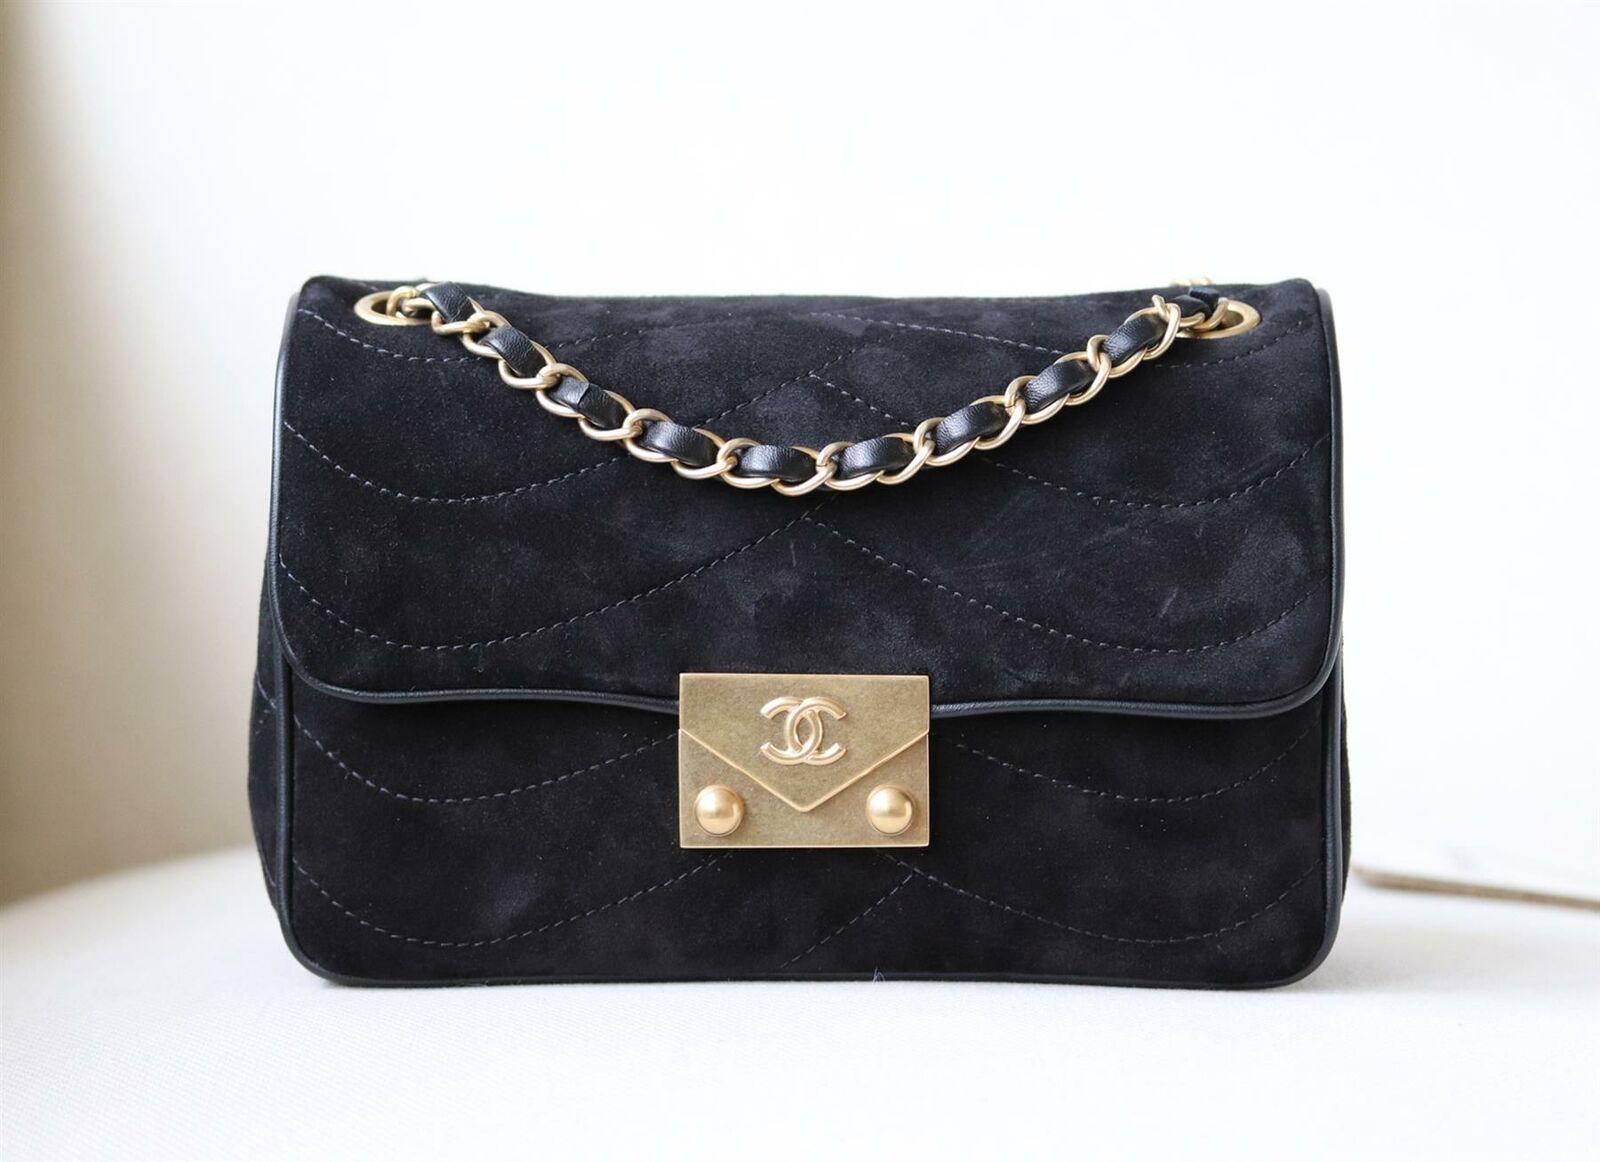 Chanel Pagoda Quilted Suede Flap Small Bag has been hand-finished by skilled artisans in the label's workshop.
Boasting a soft quilted suede and leather exterior with lambskin-leather trim, this design is accented with gold-toned and black